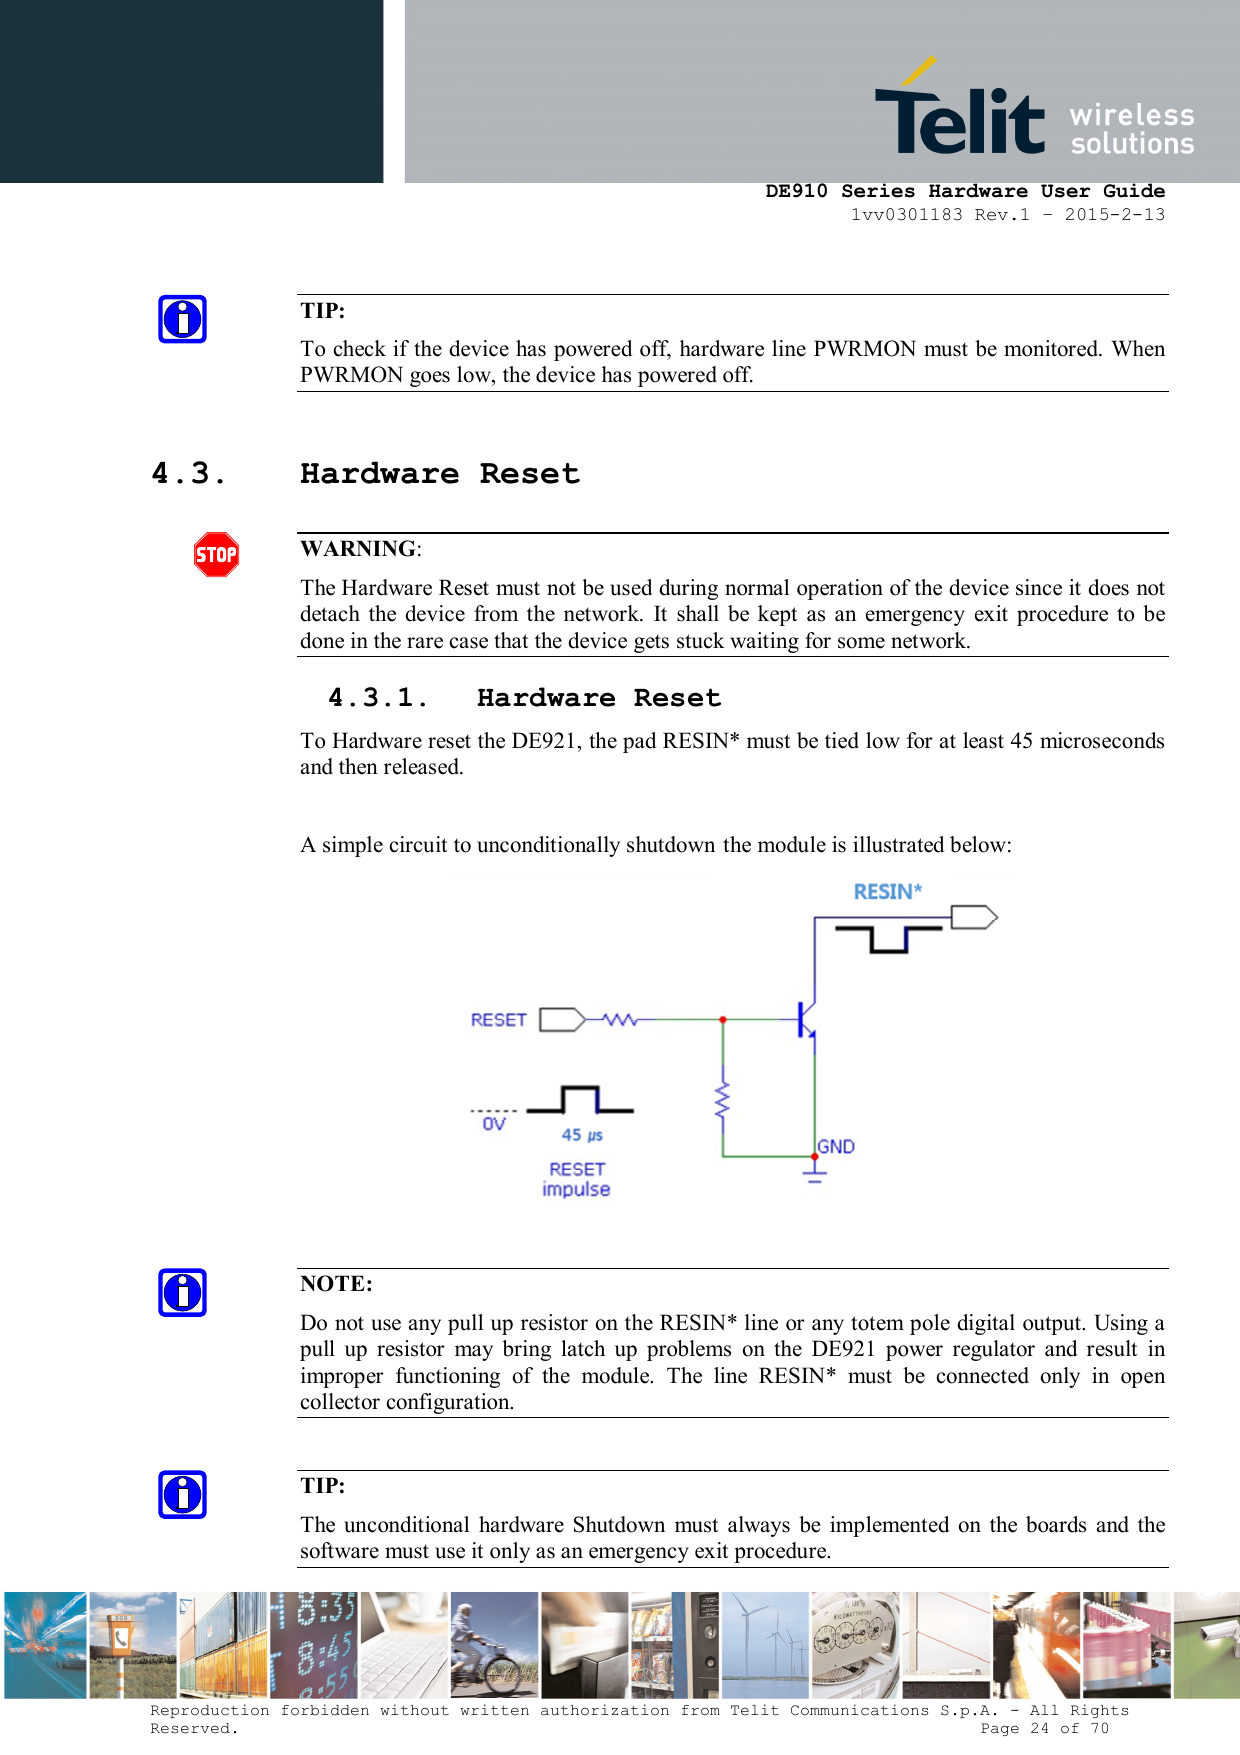      DE910 Series Hardware User Guide 1vv0301183 Rev.1 – 2015-2-13 Reproduction forbidden without written authorization from Telit Communications S.p.A. - All Rights Reserved.                                                                          Page 24 of 70  TIP: To check if the device has powered off, hardware line PWRMON must be monitored. When PWRMON goes low, the device has powered off.  4.3. Hardware Reset  WARNING: The Hardware Reset must not be used during normal operation of the device since it does not detach  the  device  from  the  network.  It  shall  be  kept  as  an  emergency  exit  procedure  to  be done in the rare case that the device gets stuck waiting for some network. 4.3.1. Hardware Reset To Hardware reset the DE921, the pad RESIN* must be tied low for at least 45 microseconds and then released.  A simple circuit to unconditionally shutdown the module is illustrated below:   NOTE: Do not use any pull up resistor on the RESIN* line or any totem pole digital output. Using a pull  up  resistor  may  bring  latch  up  problems  on  the  DE921  power  regulator  and  result  in improper  functioning  of  the  module.  The  line  RESIN*  must  be  connected  only  in  open collector configuration.  TIP: The  unconditional  hardware  Shutdown  must  always  be  implemented  on  the  boards  and  the software must use it only as an emergency exit procedure. 